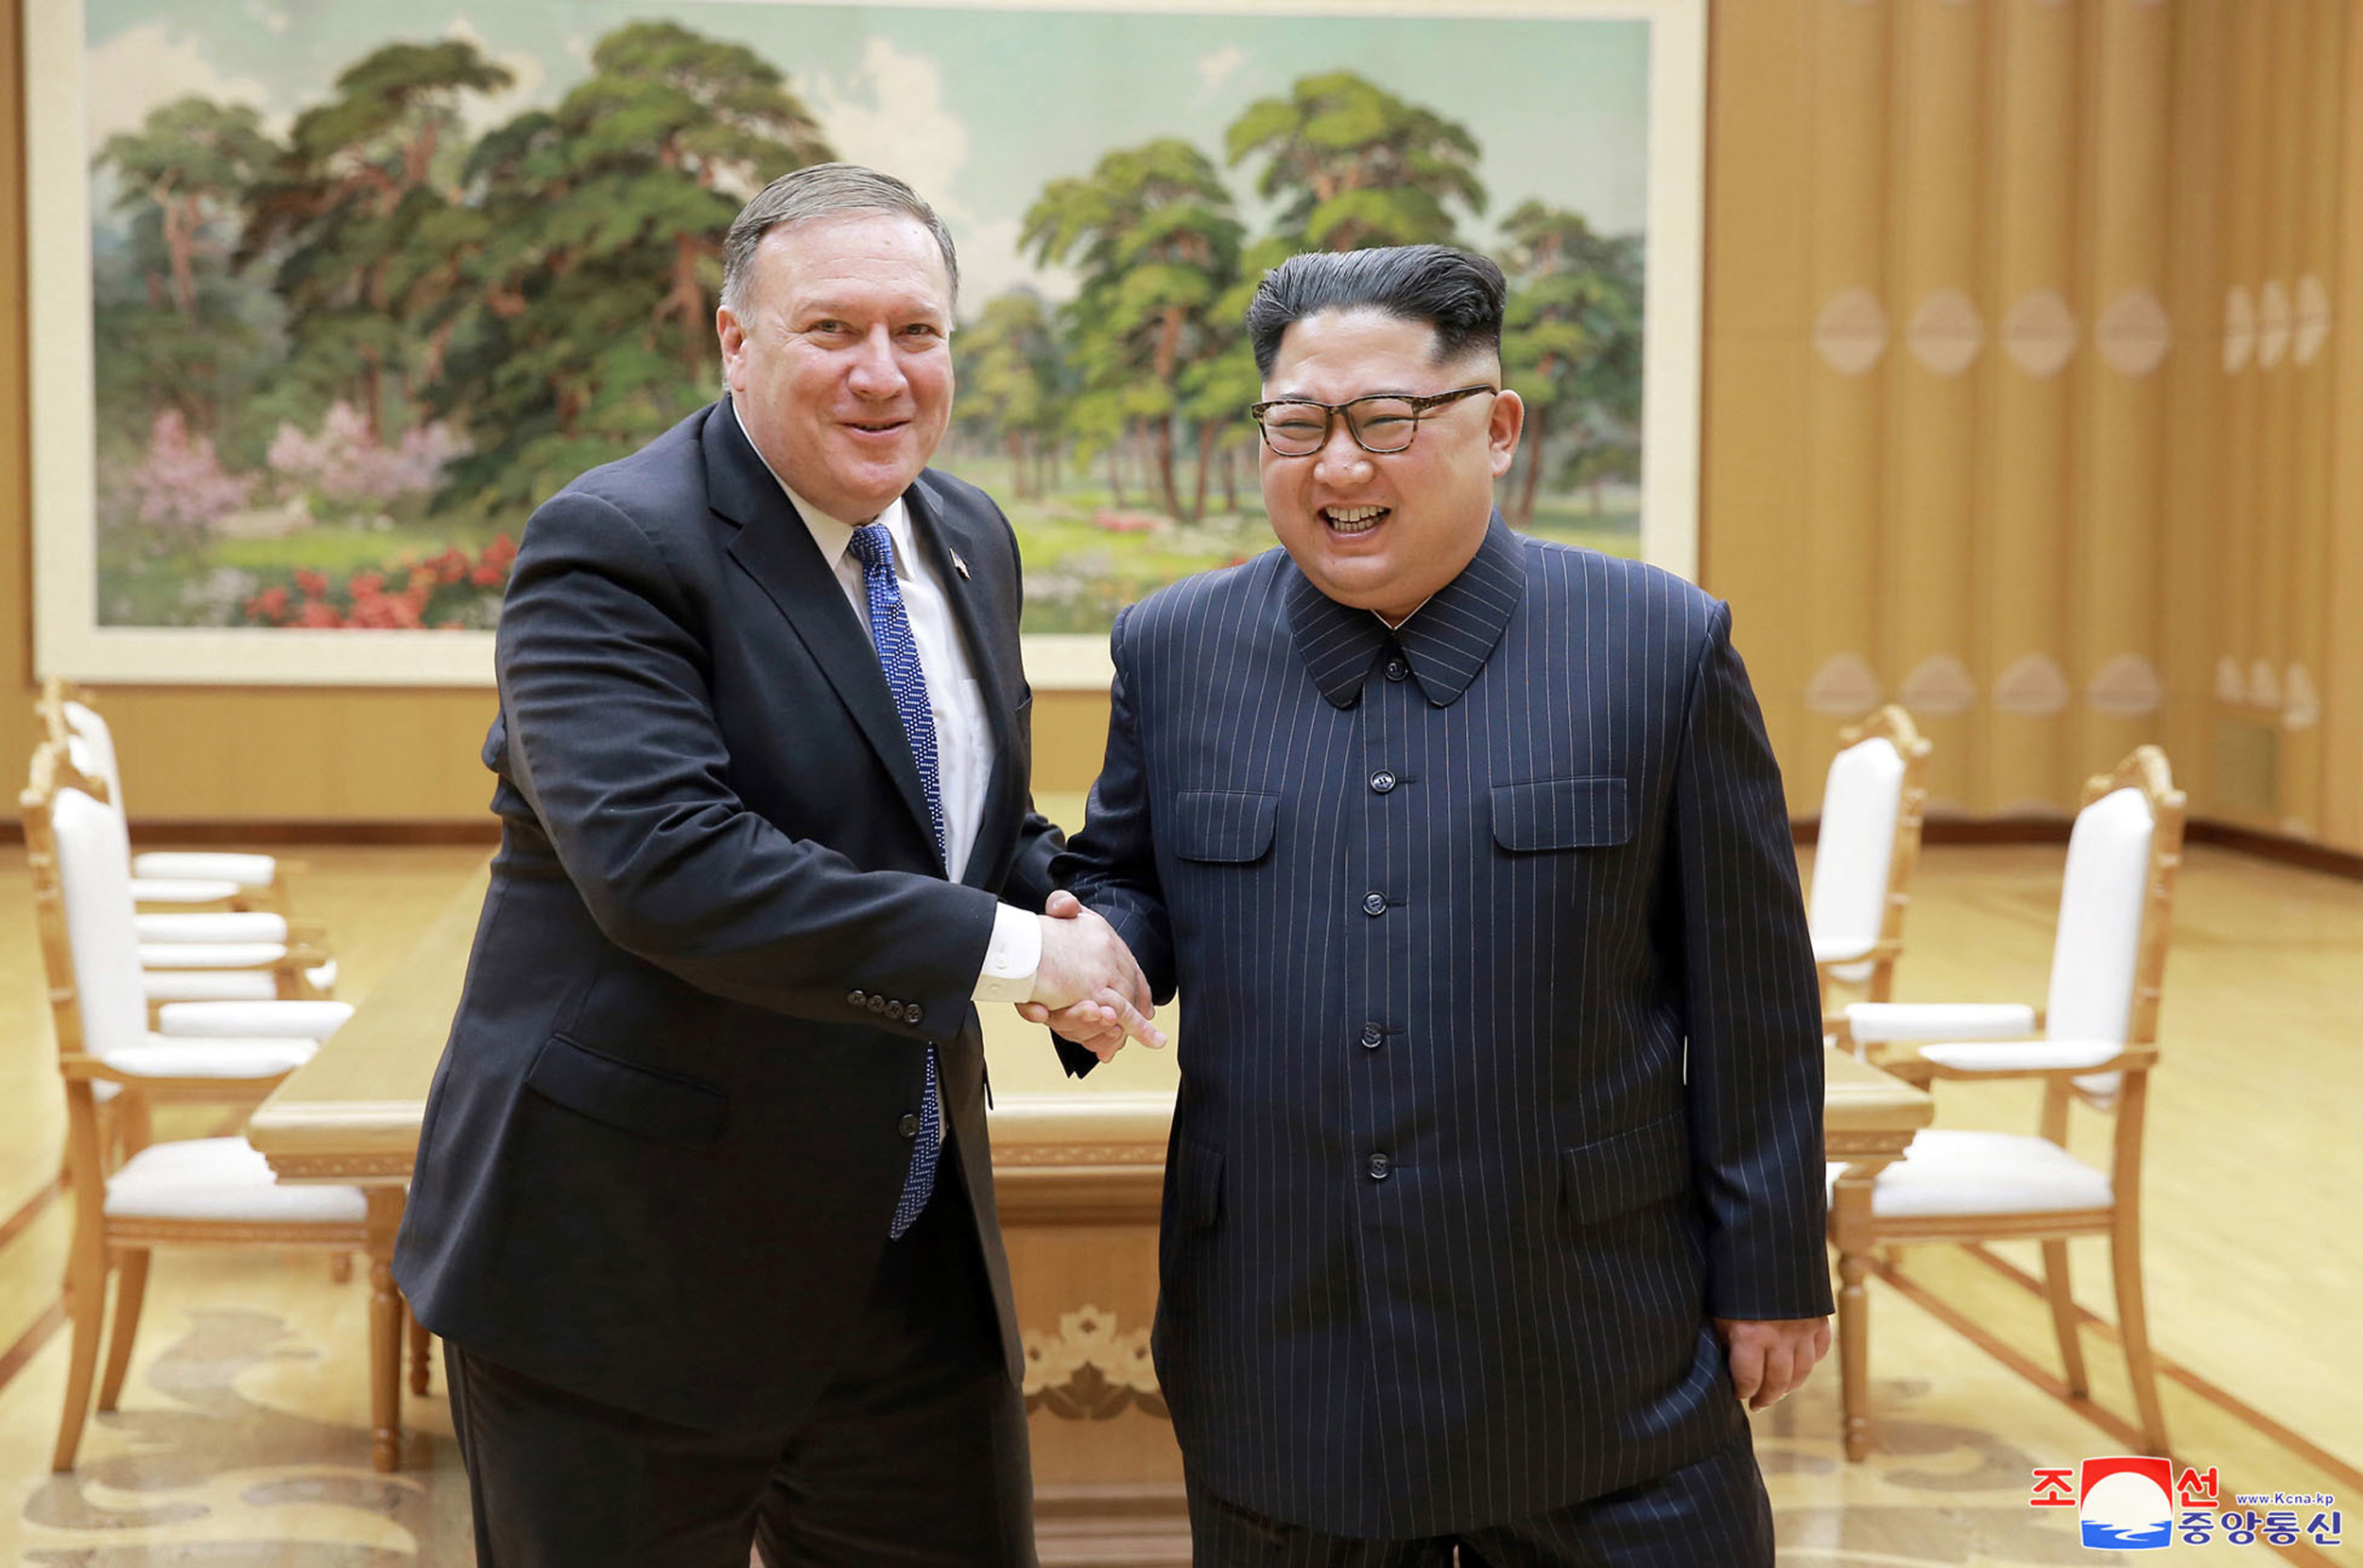 PHOTO: Secretary of State Mike Pompeo, left, shakes hands with North Korean leader Kim Jong Un during a meeting at Workers' Party of Korea headquarters in Pyongyang, North Korea,  May 8, 2018.